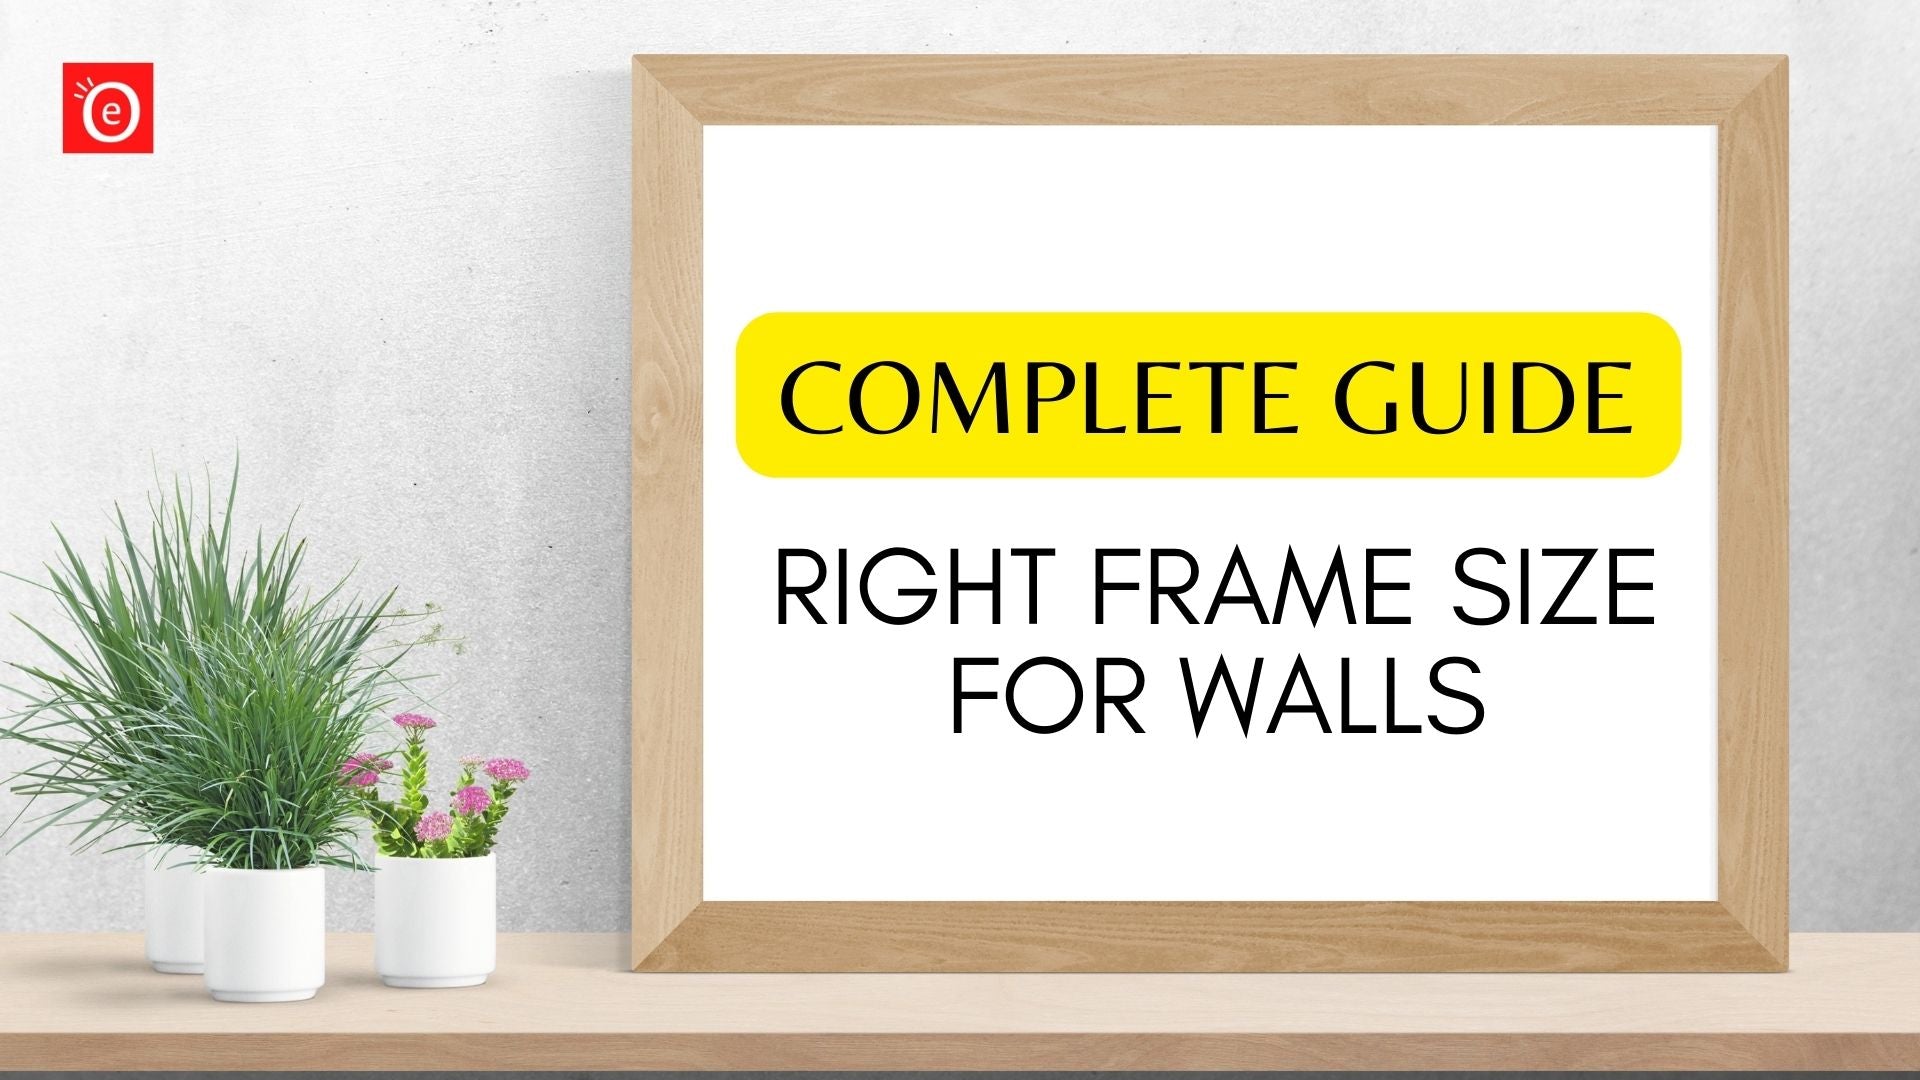 The Ultimate Guide to Standard Frame Sizes